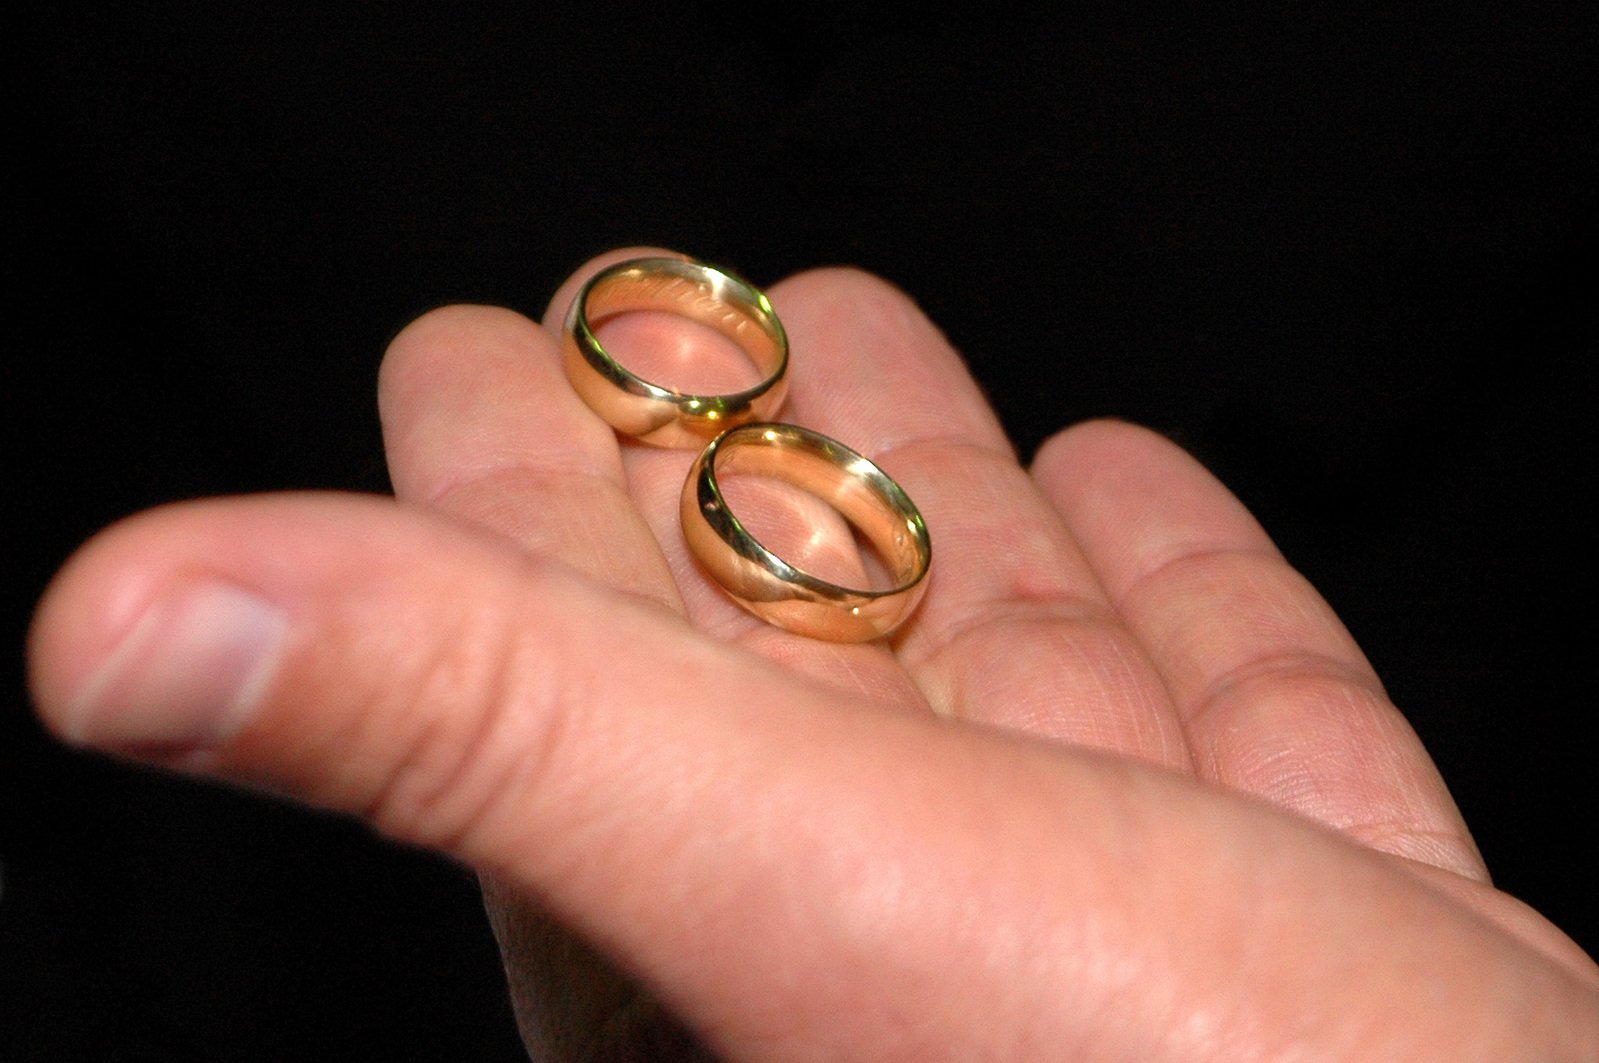 two golden rings on the palm of a person